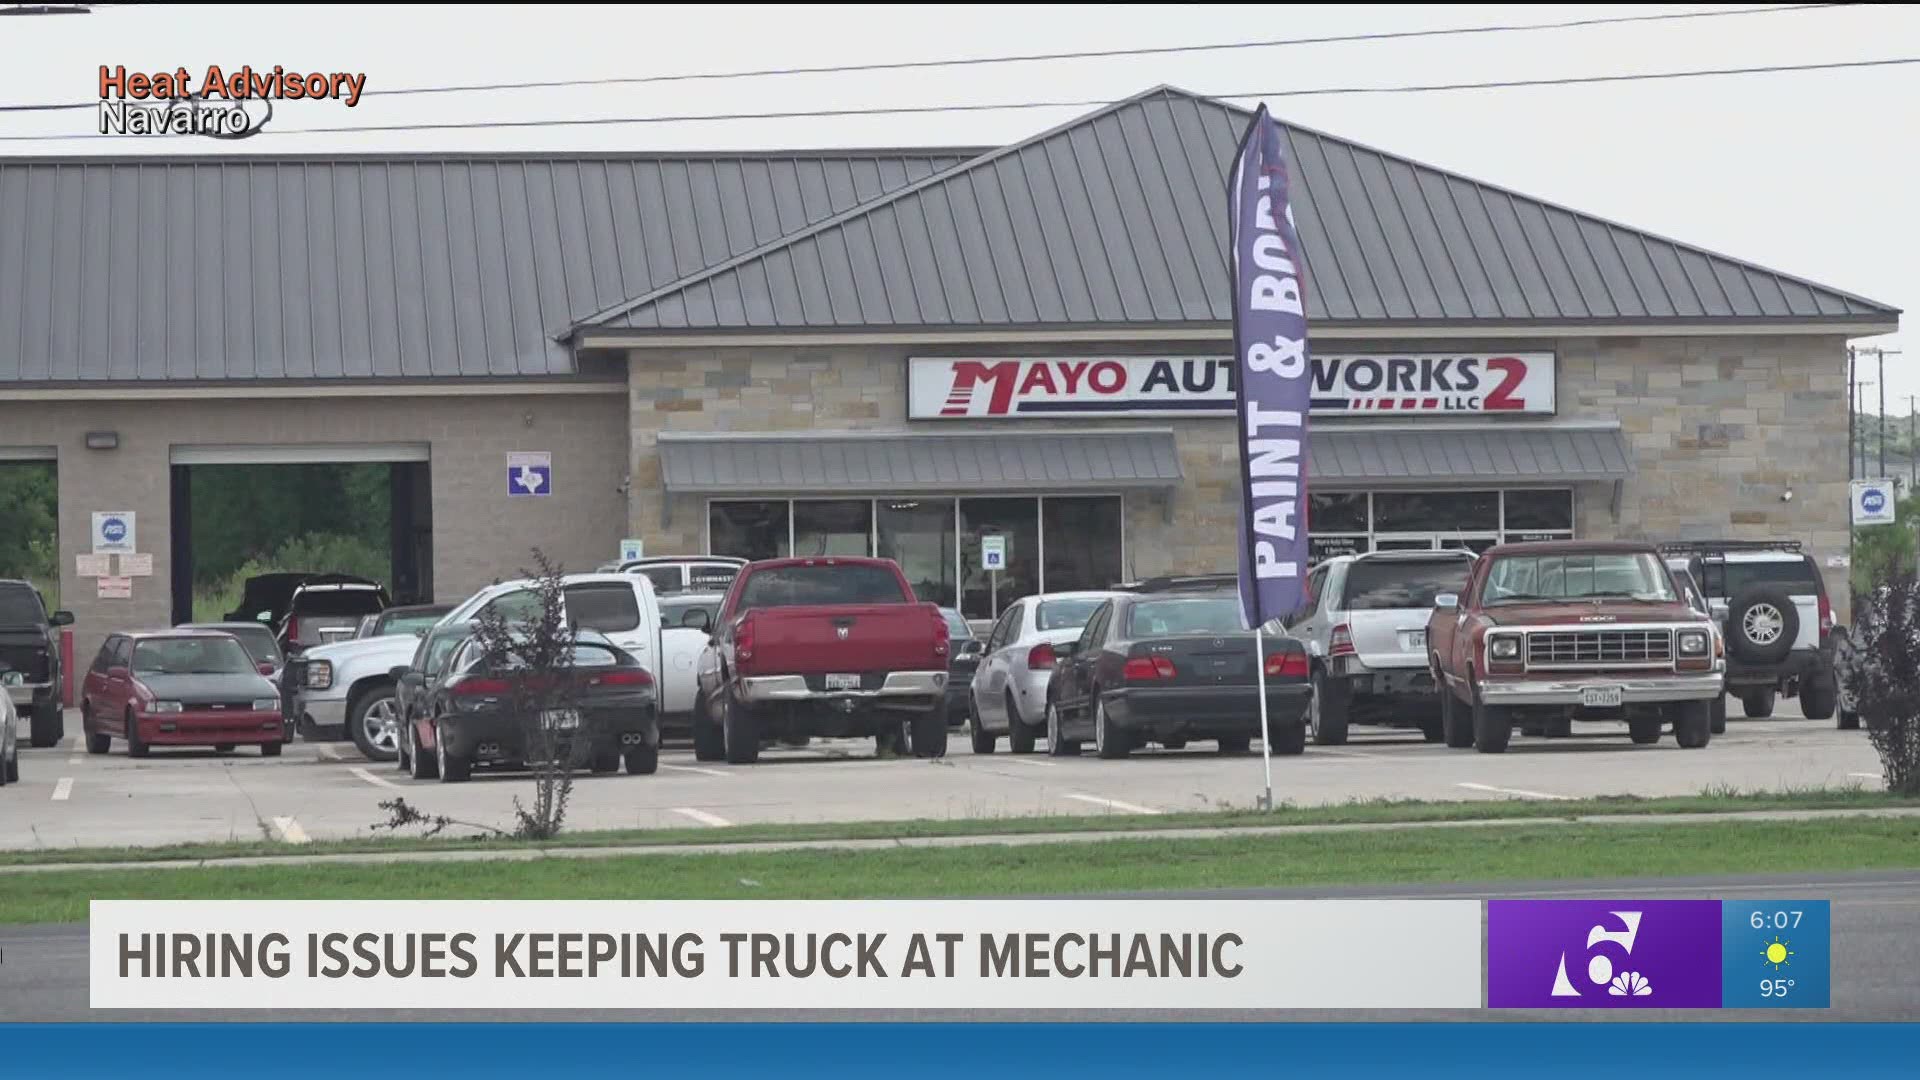 A Killeen woman has been waiting a month to get her truck fixed, and 6 News found out it's due in part to a staffing issues.